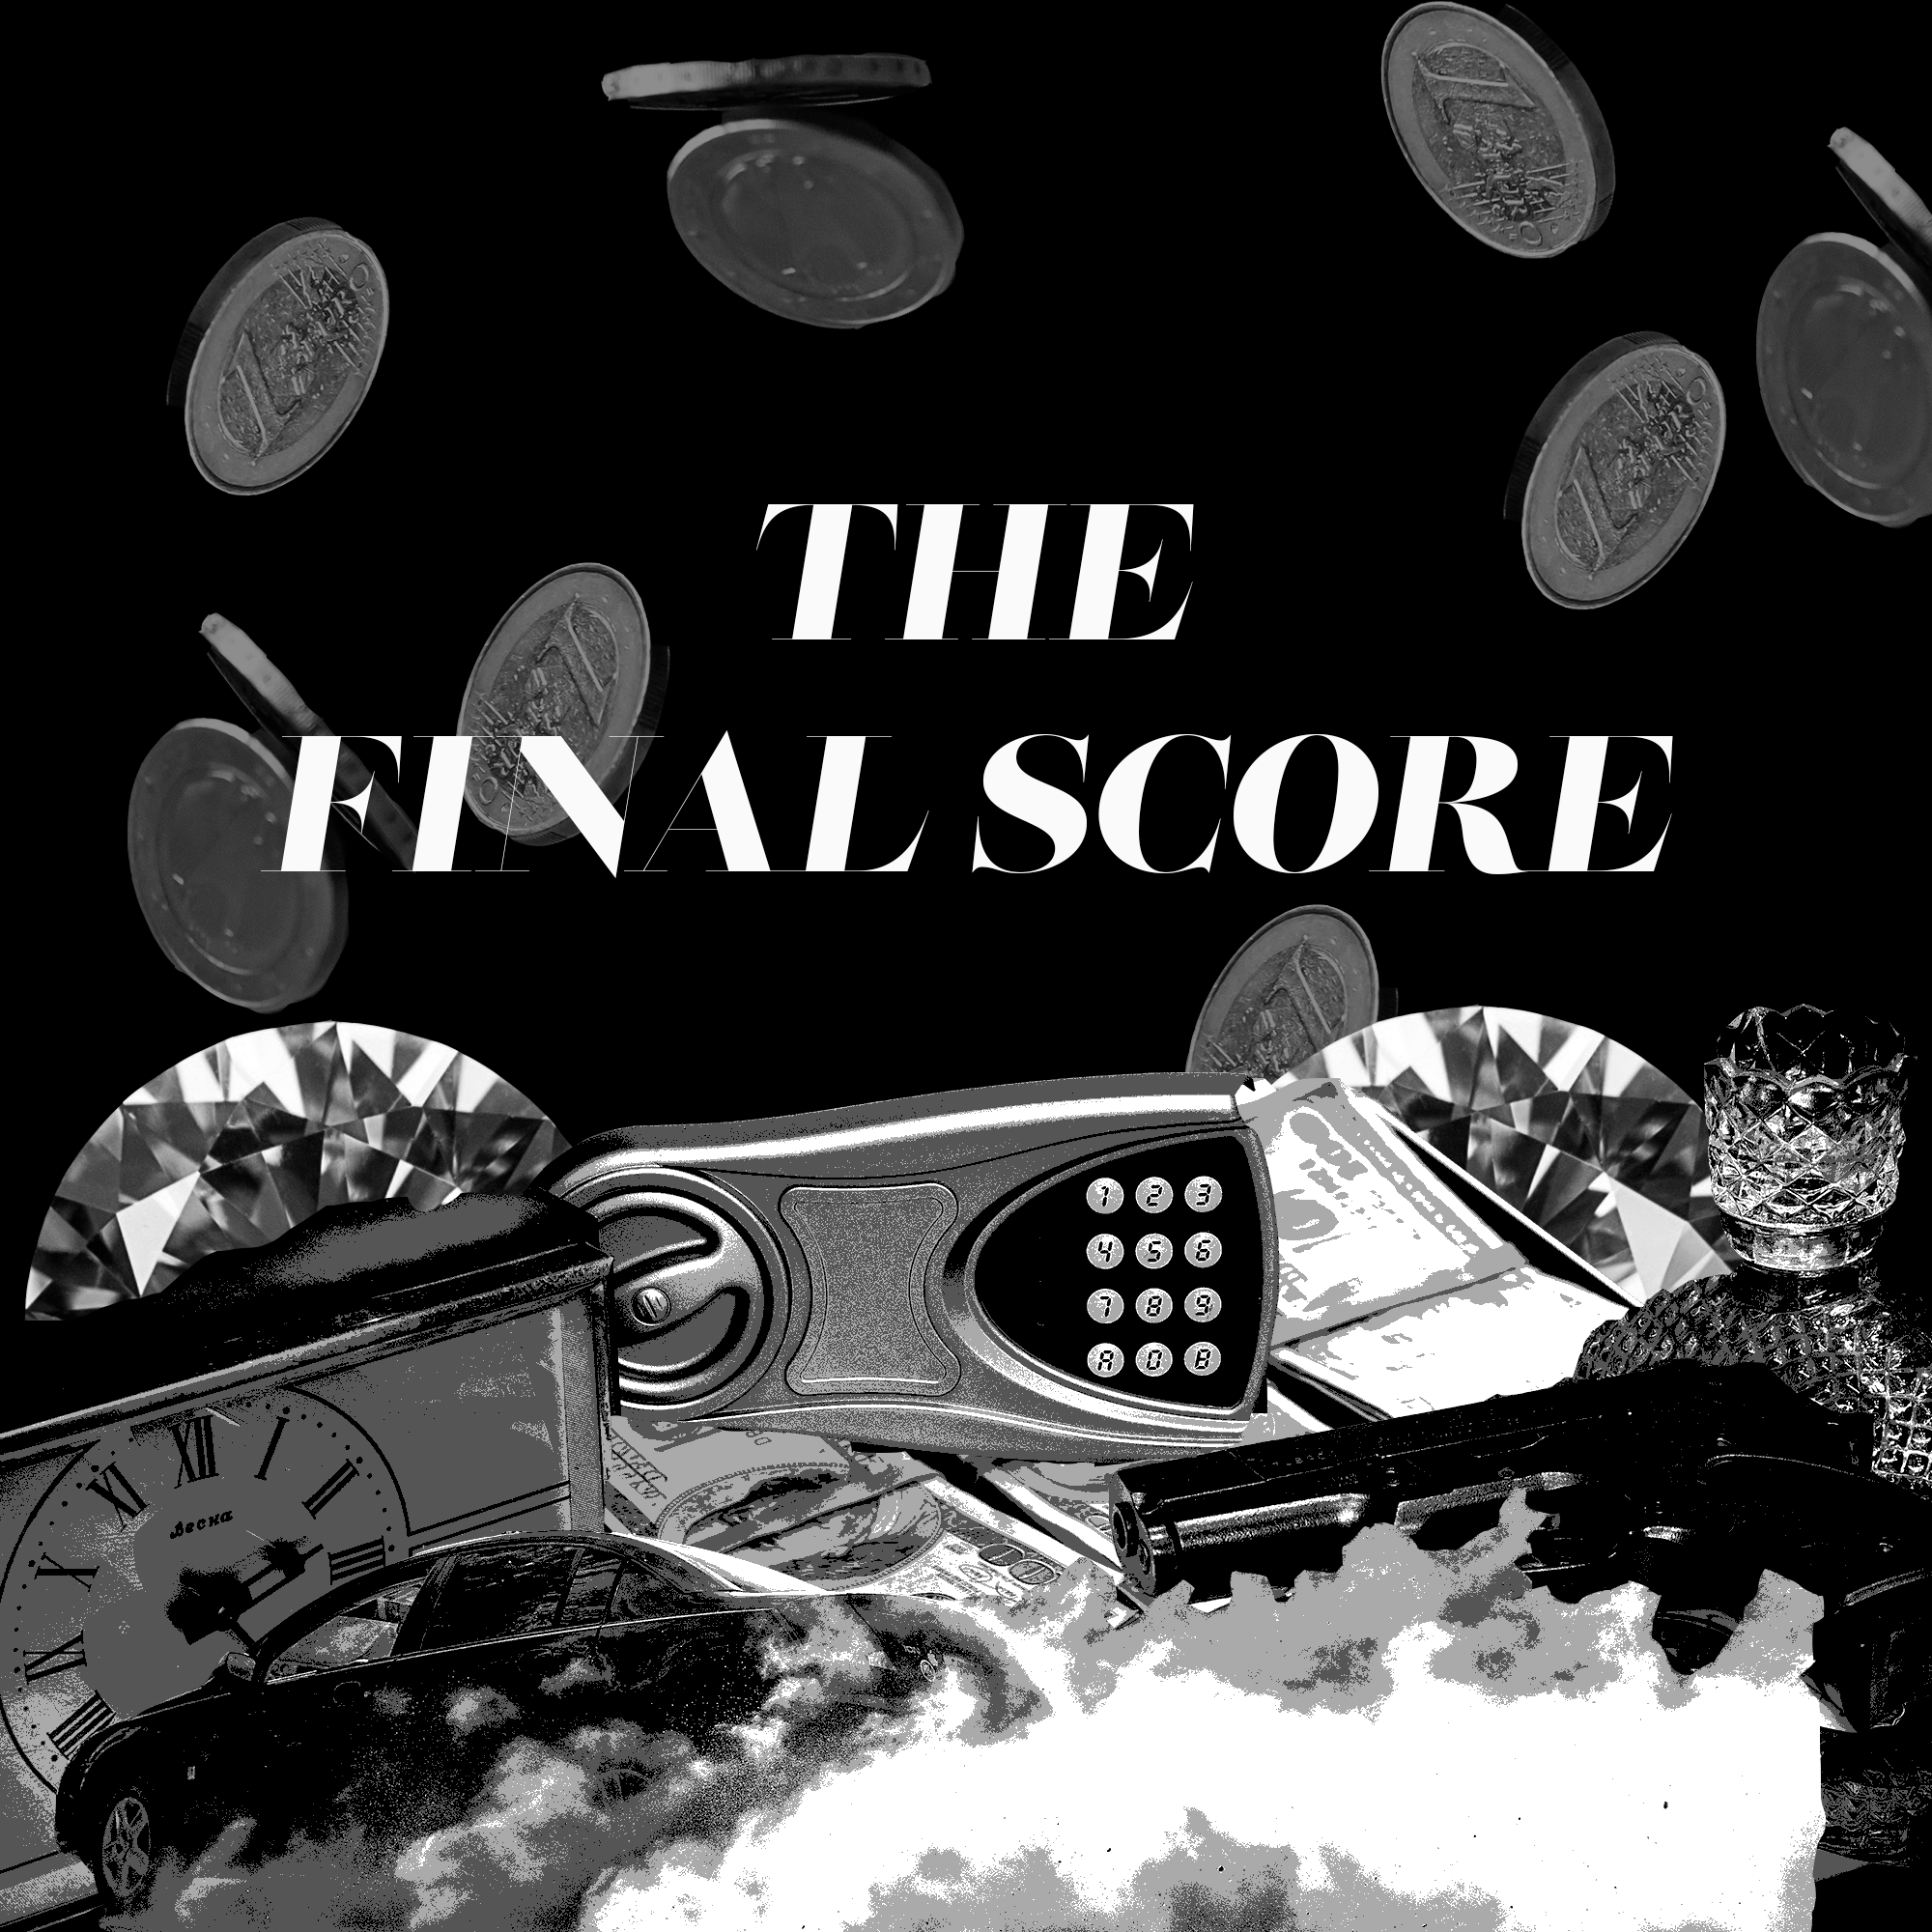 The Final Score by floatingchair